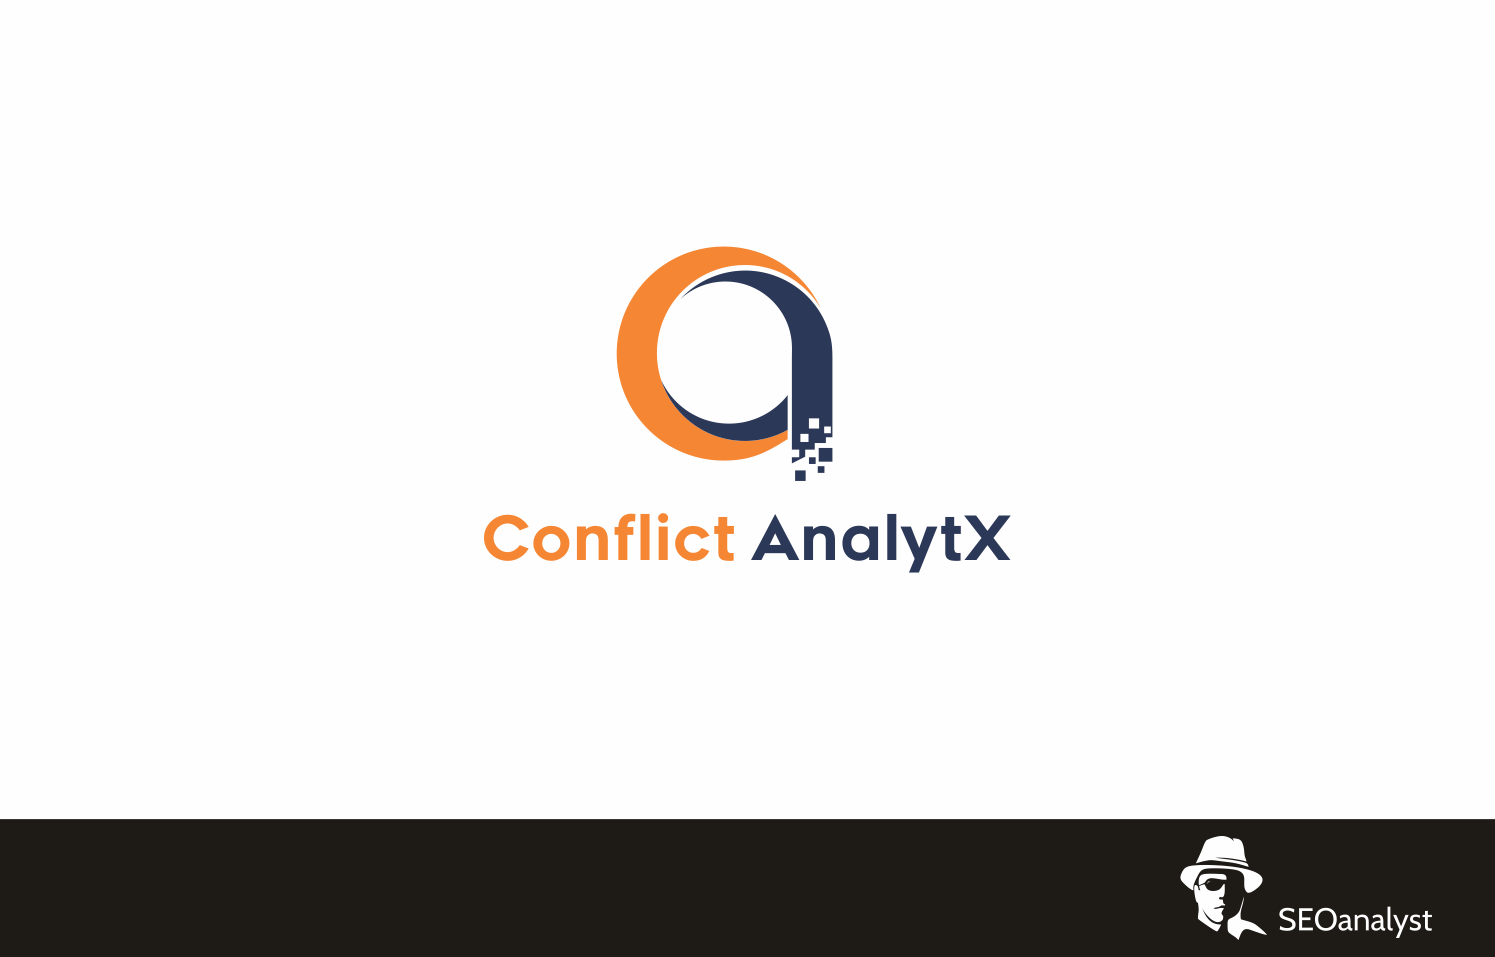 Conflict Logo - Conservative, Bold, Legal Logo Design for Conflict AnalytX by ...